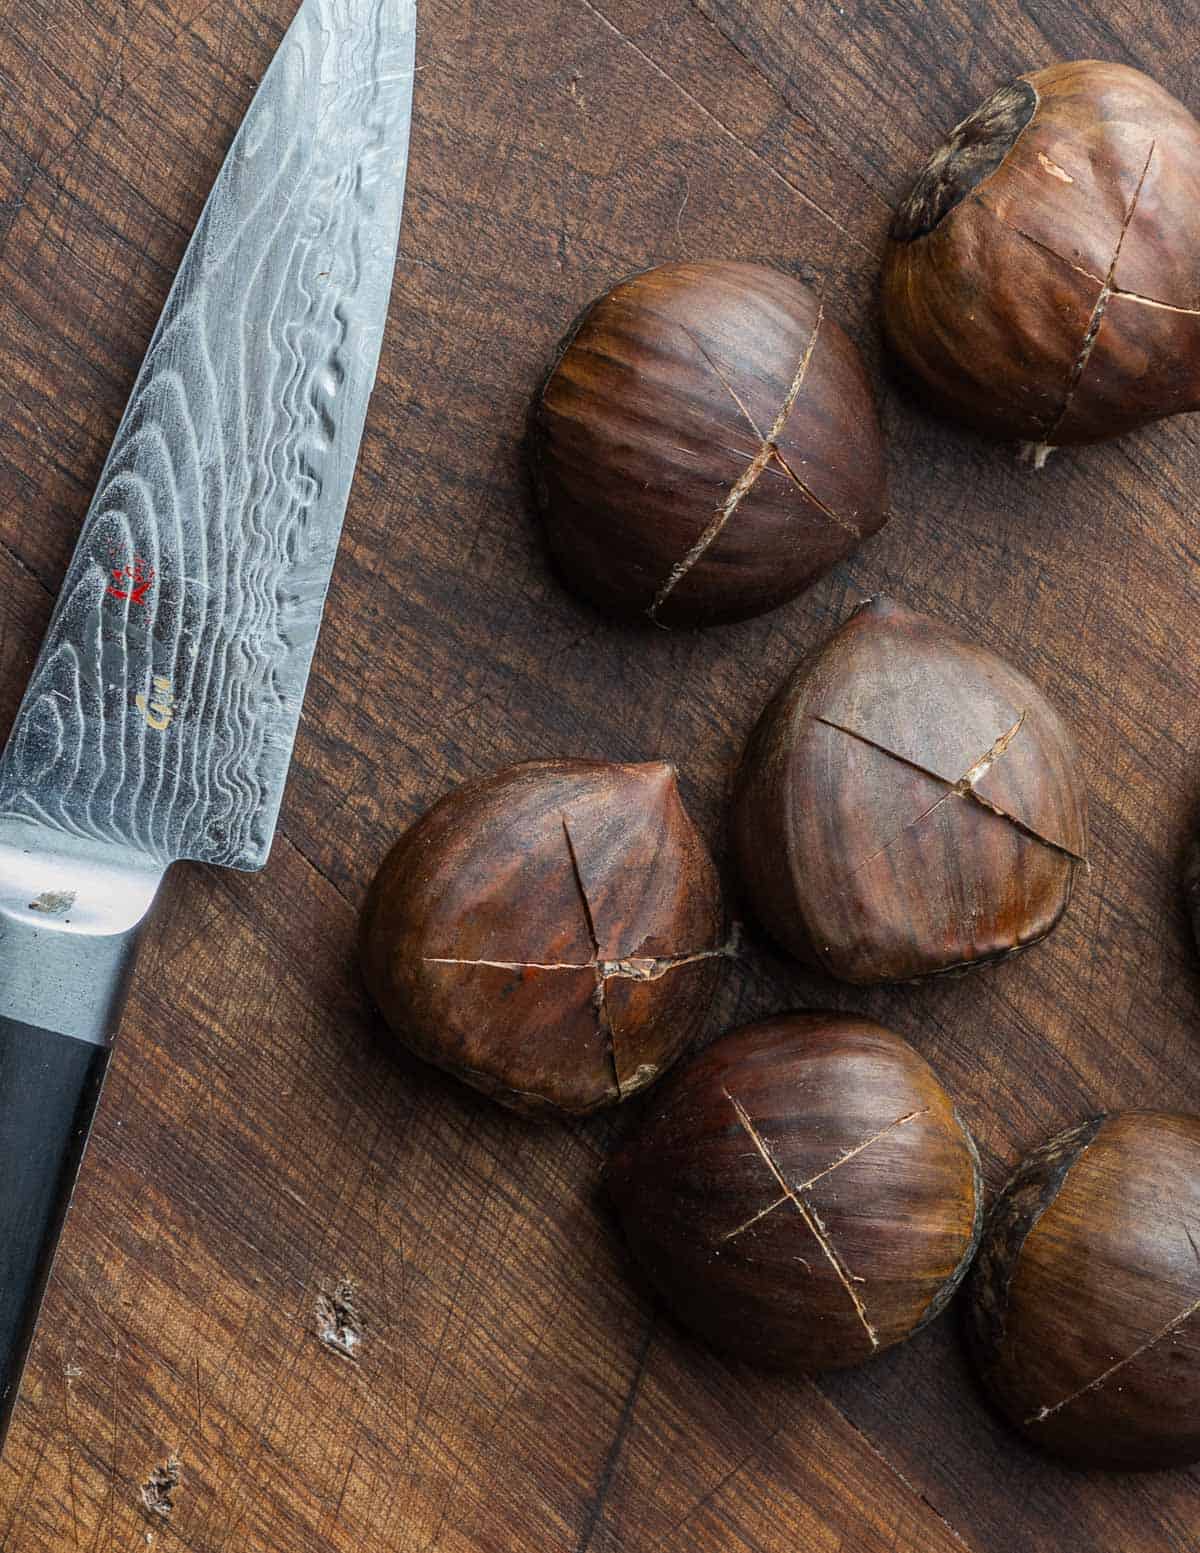 Italian chestnuts that have been scored with a knife on a cutting board.